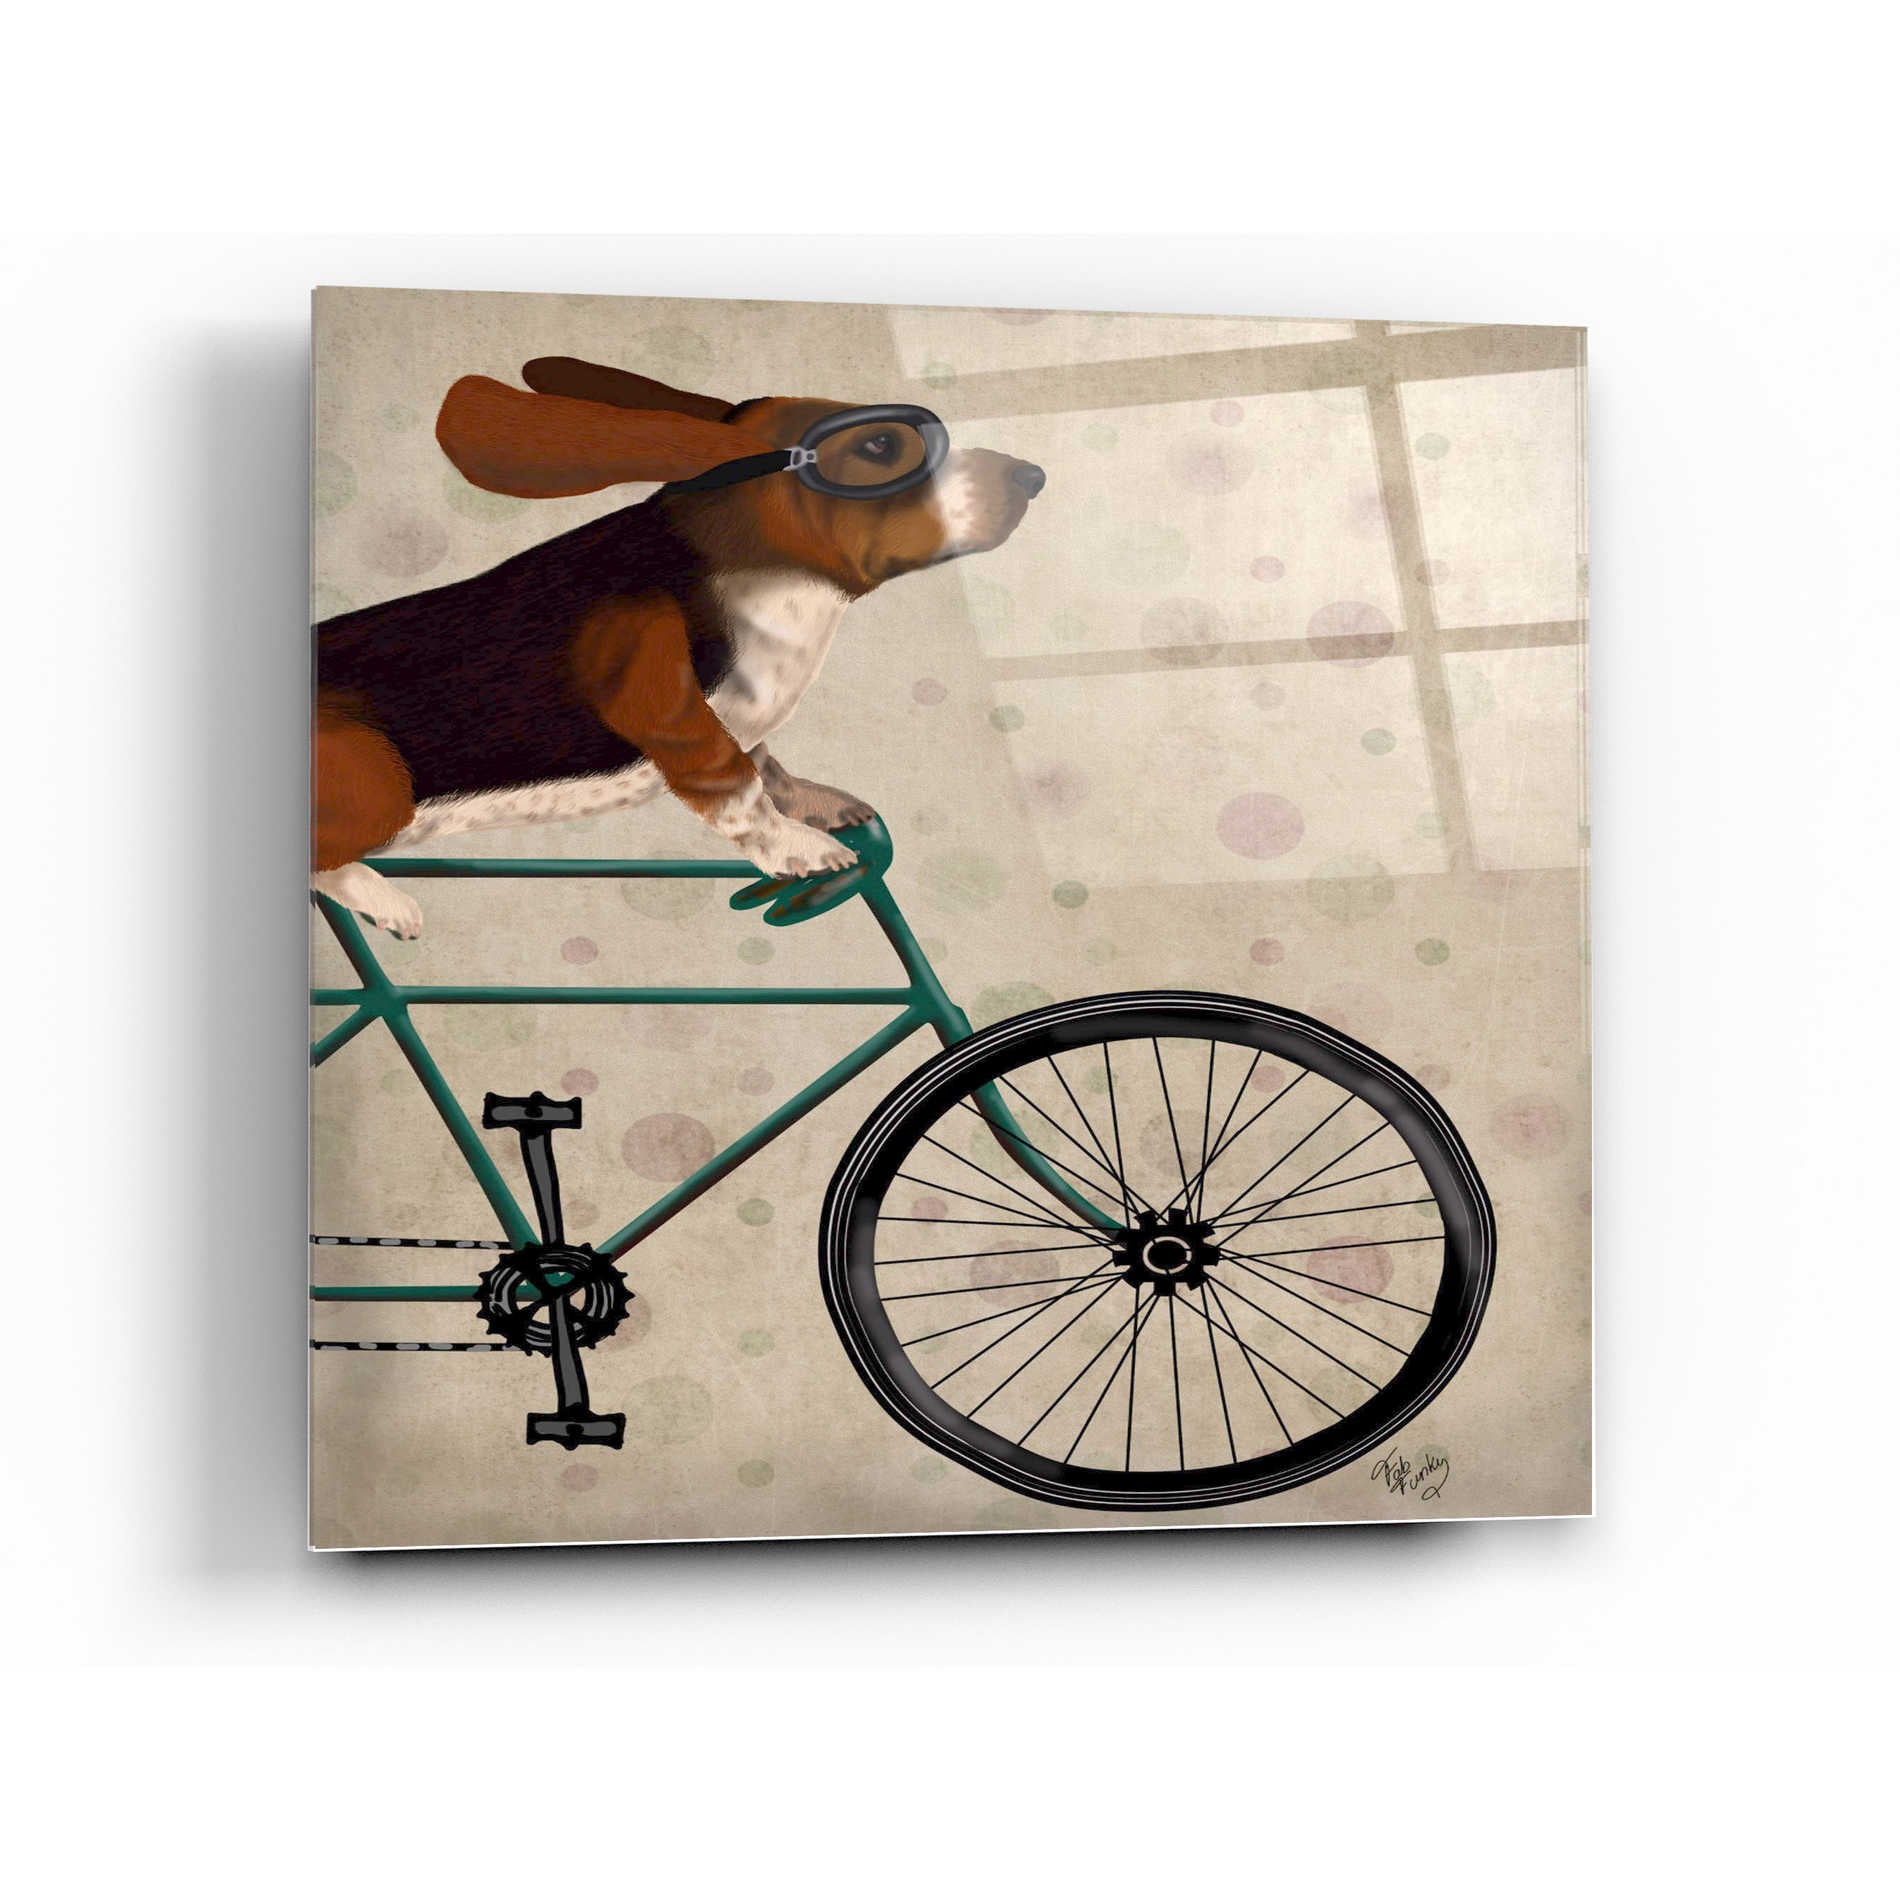 Epic Art 'Basset Hound on Bicycle' by Fab Funky Acrylic Glass Wall Art,12x12